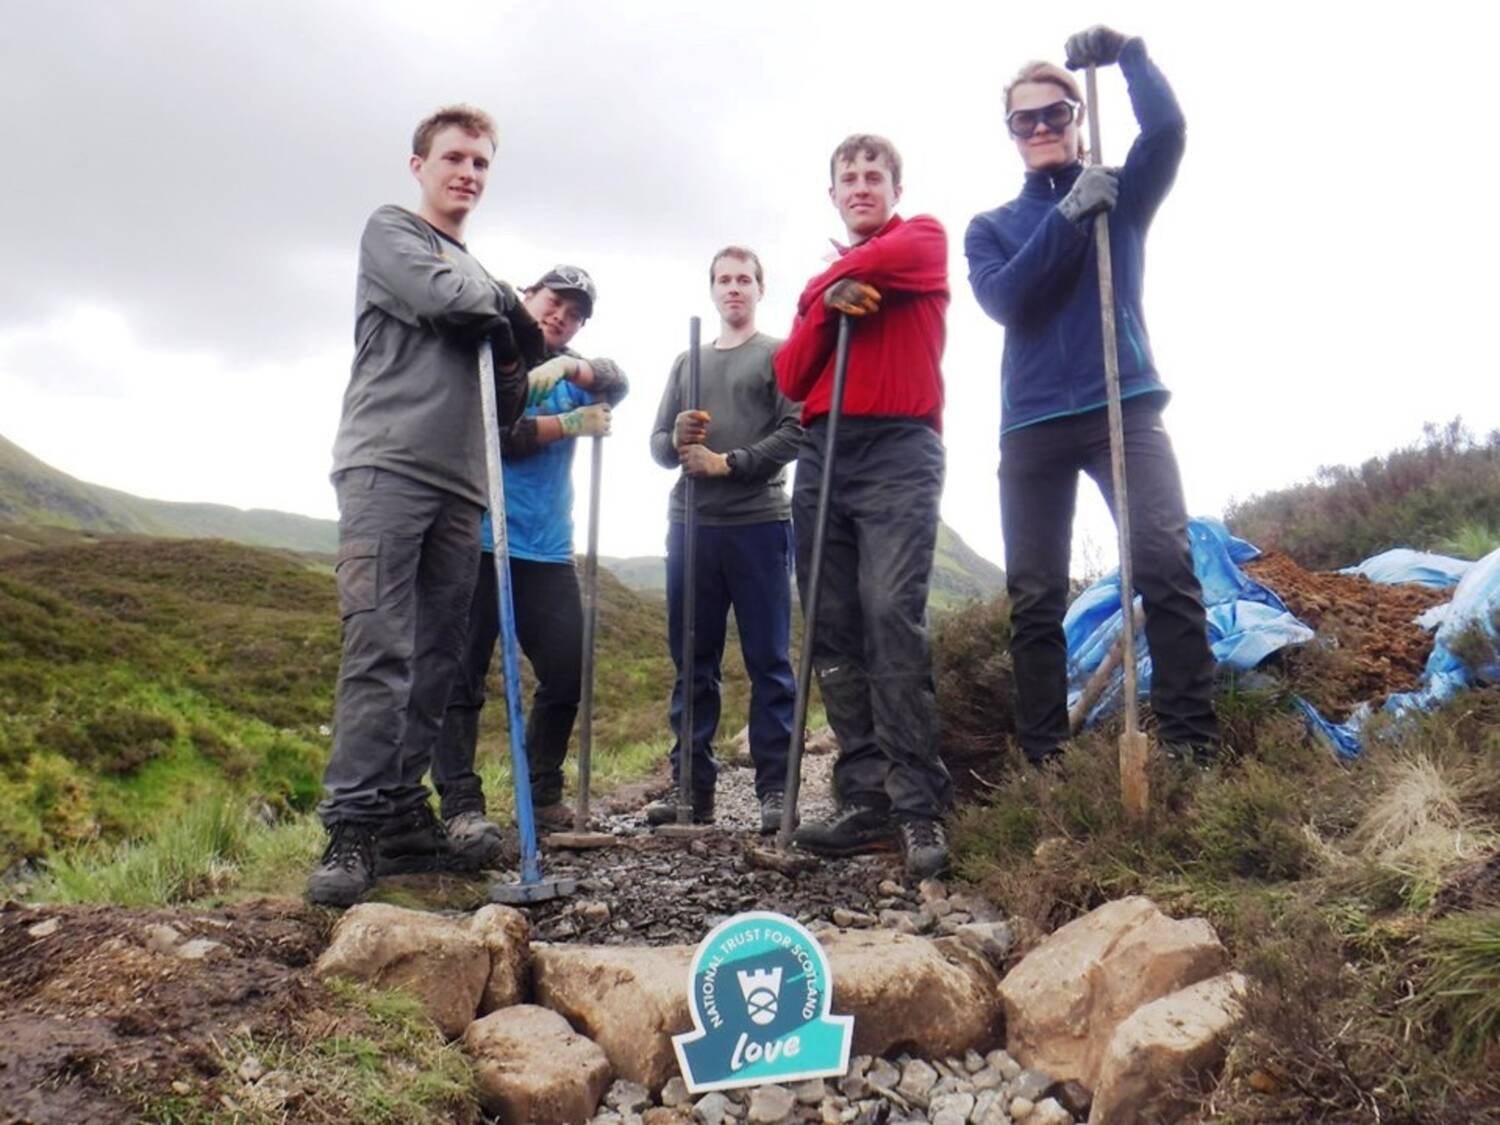 Five people stand beside a mountain path, holding long tools used to shape the path. A National Trust for Scotland ‘Love’ sign sits in the foreground, on the path.